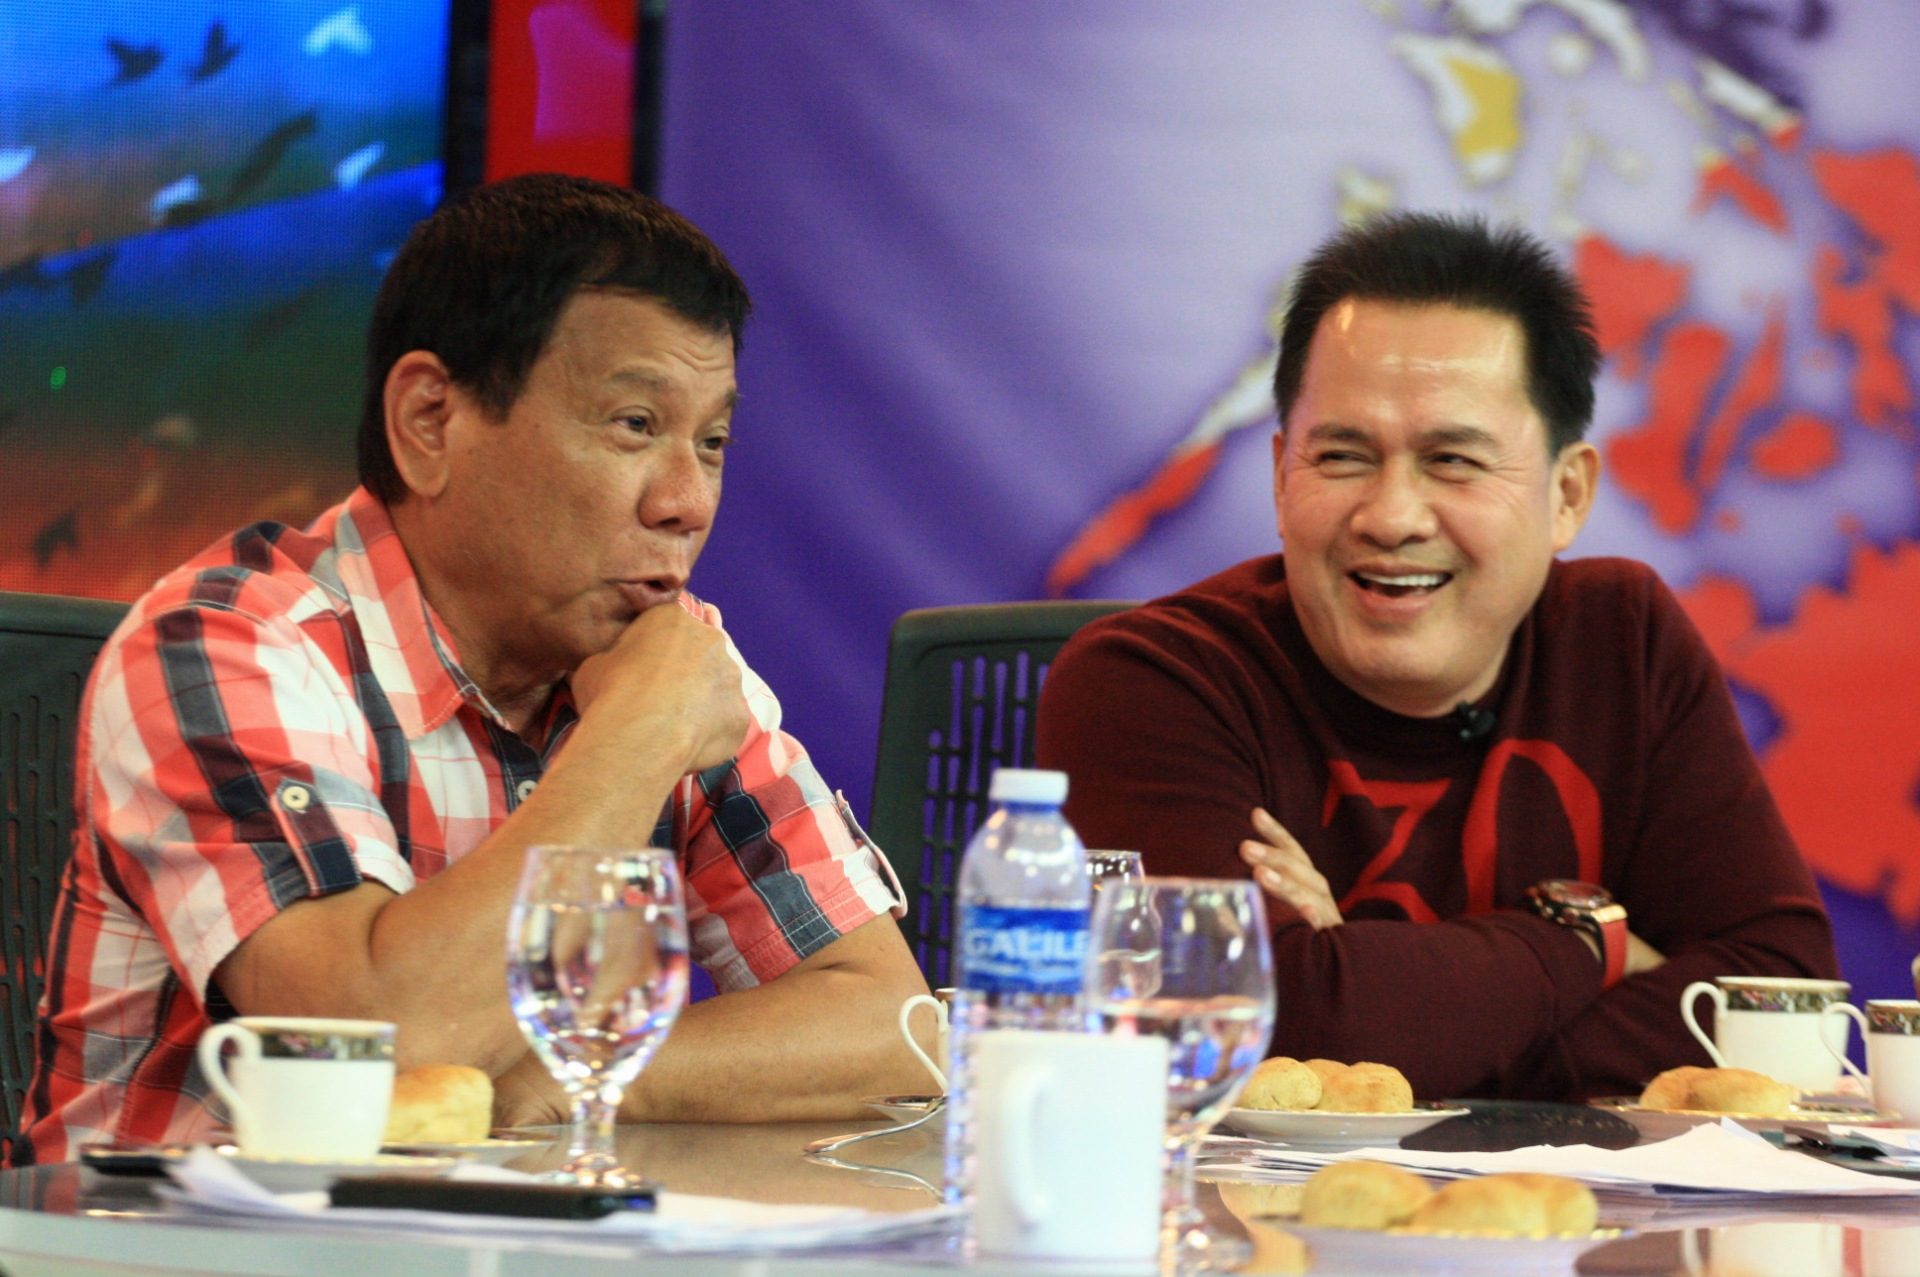 GOOD FRIENDS. Rody Duterte and Pastor Apollo Quiboloy catch up at the end of Election Day in Davao City. Photo by Manman Dejeto/Rappler 